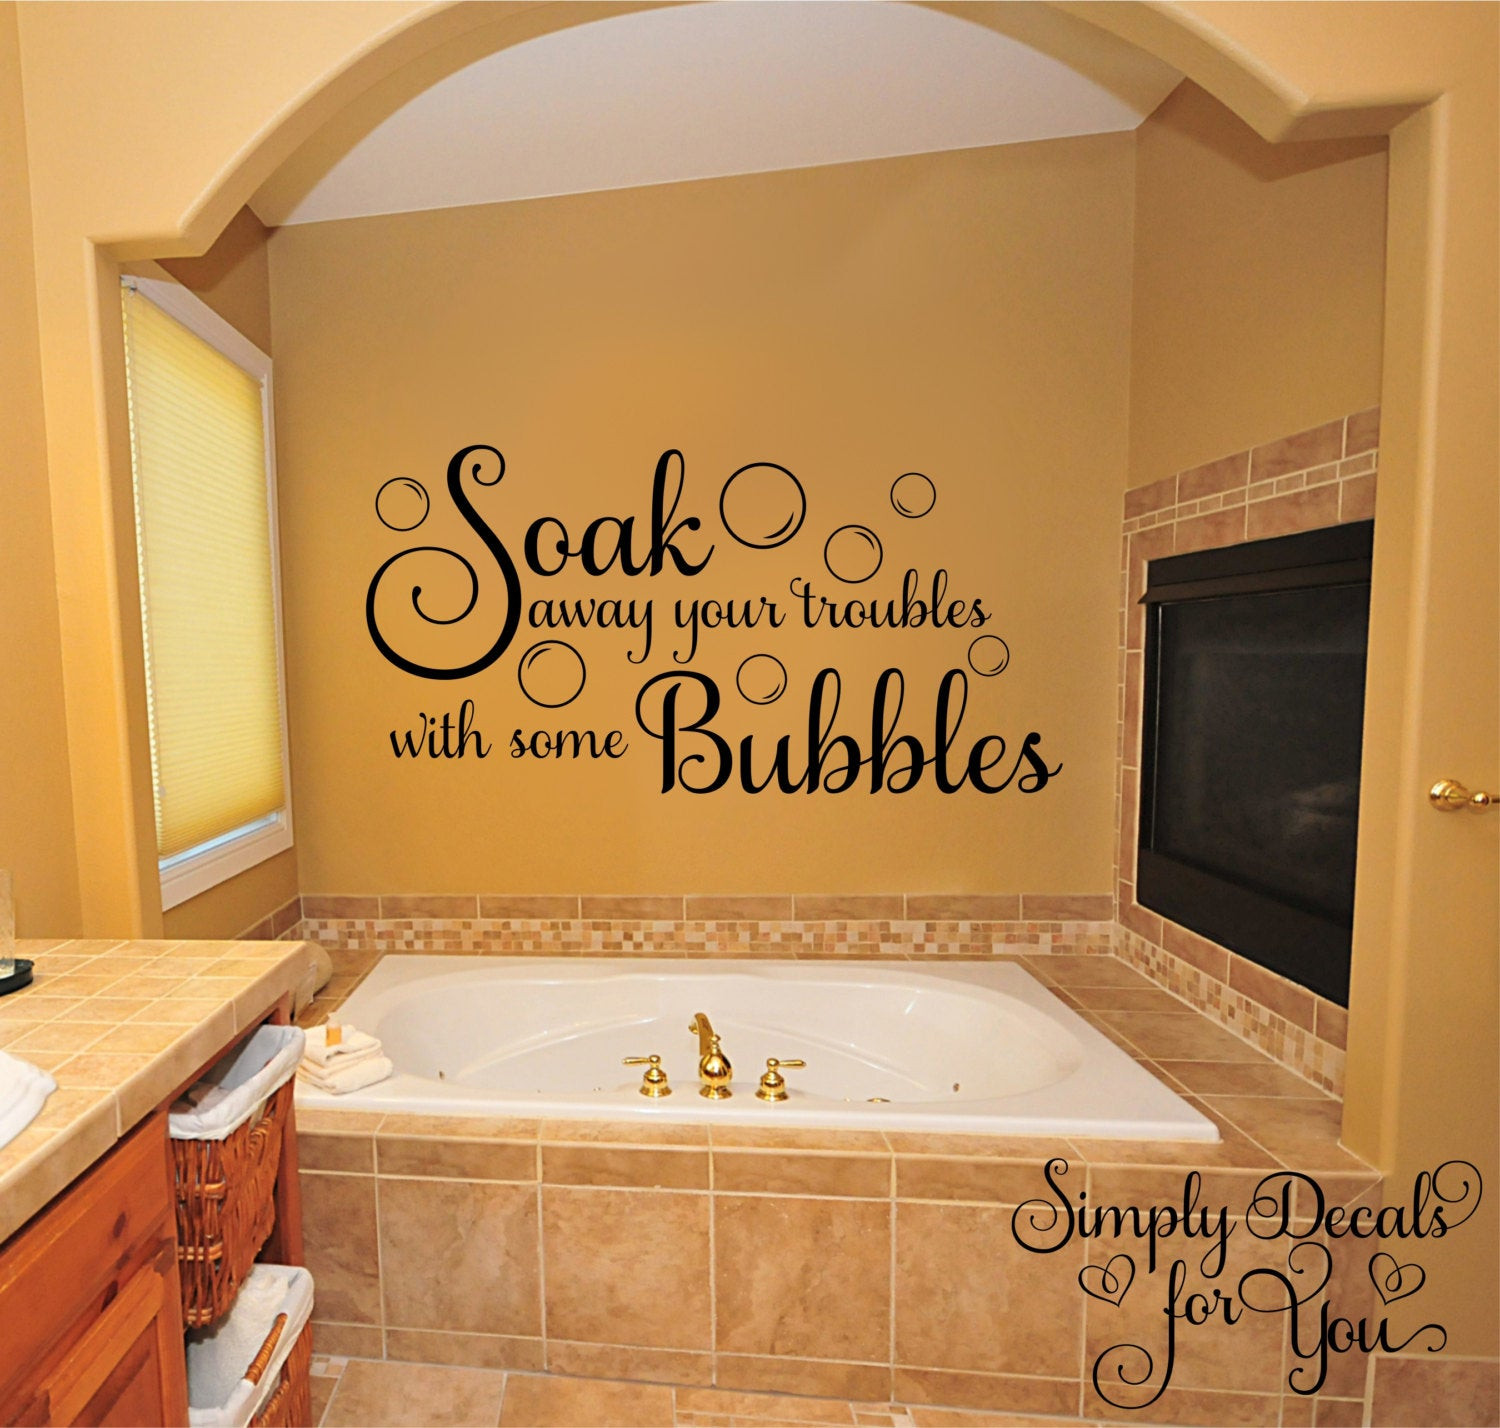 Wall Decals for Bathroom Inspirational Bubble Bath Wall Decal Bathroom Decal Bathroom Sticker Wall